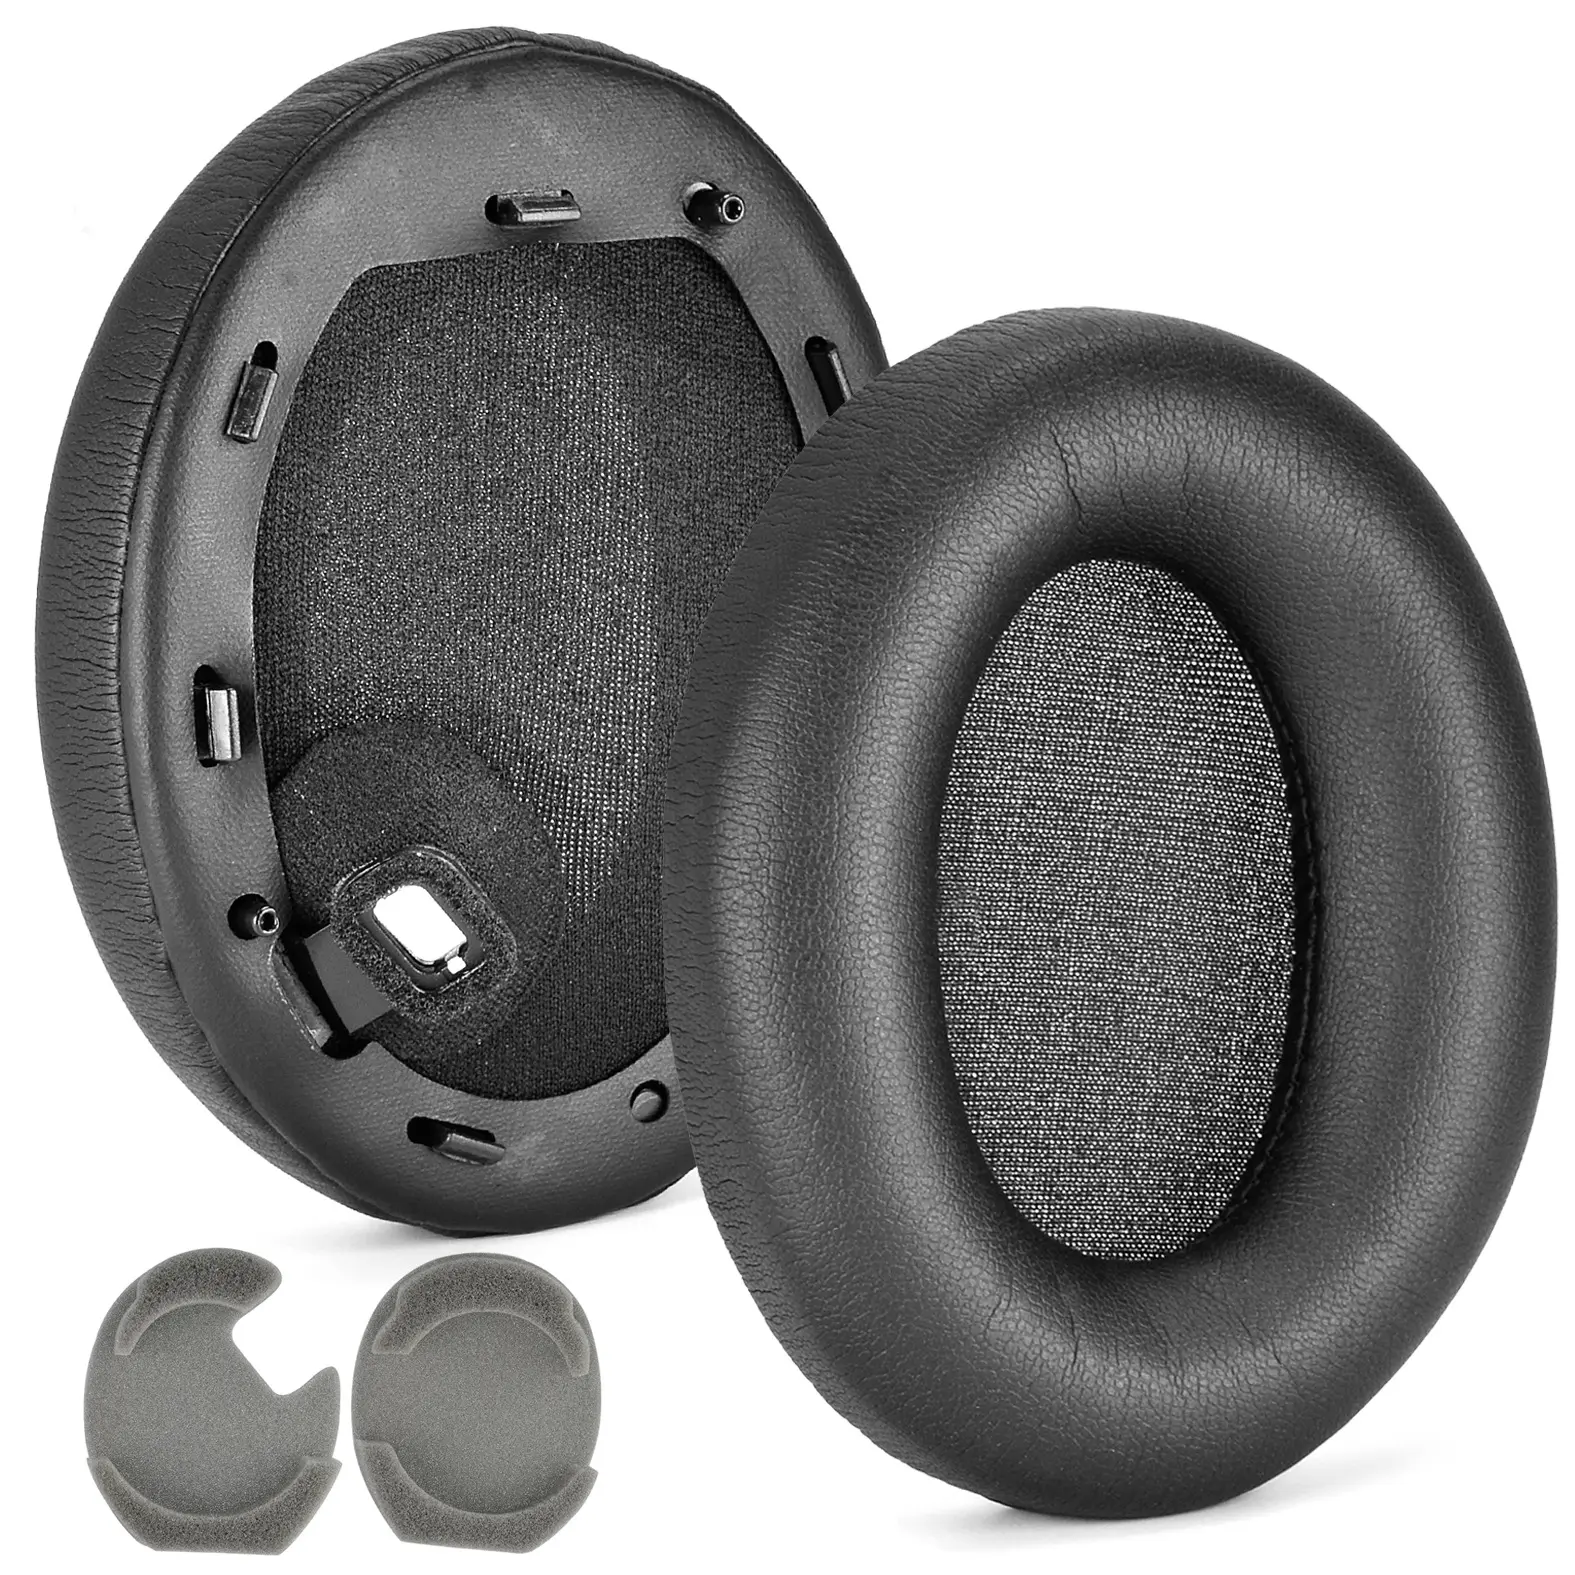 for Sony WH-1000XM4 Ear pads Headphones Replacement Headset Ear Cushions Cover Earpads Ear pads